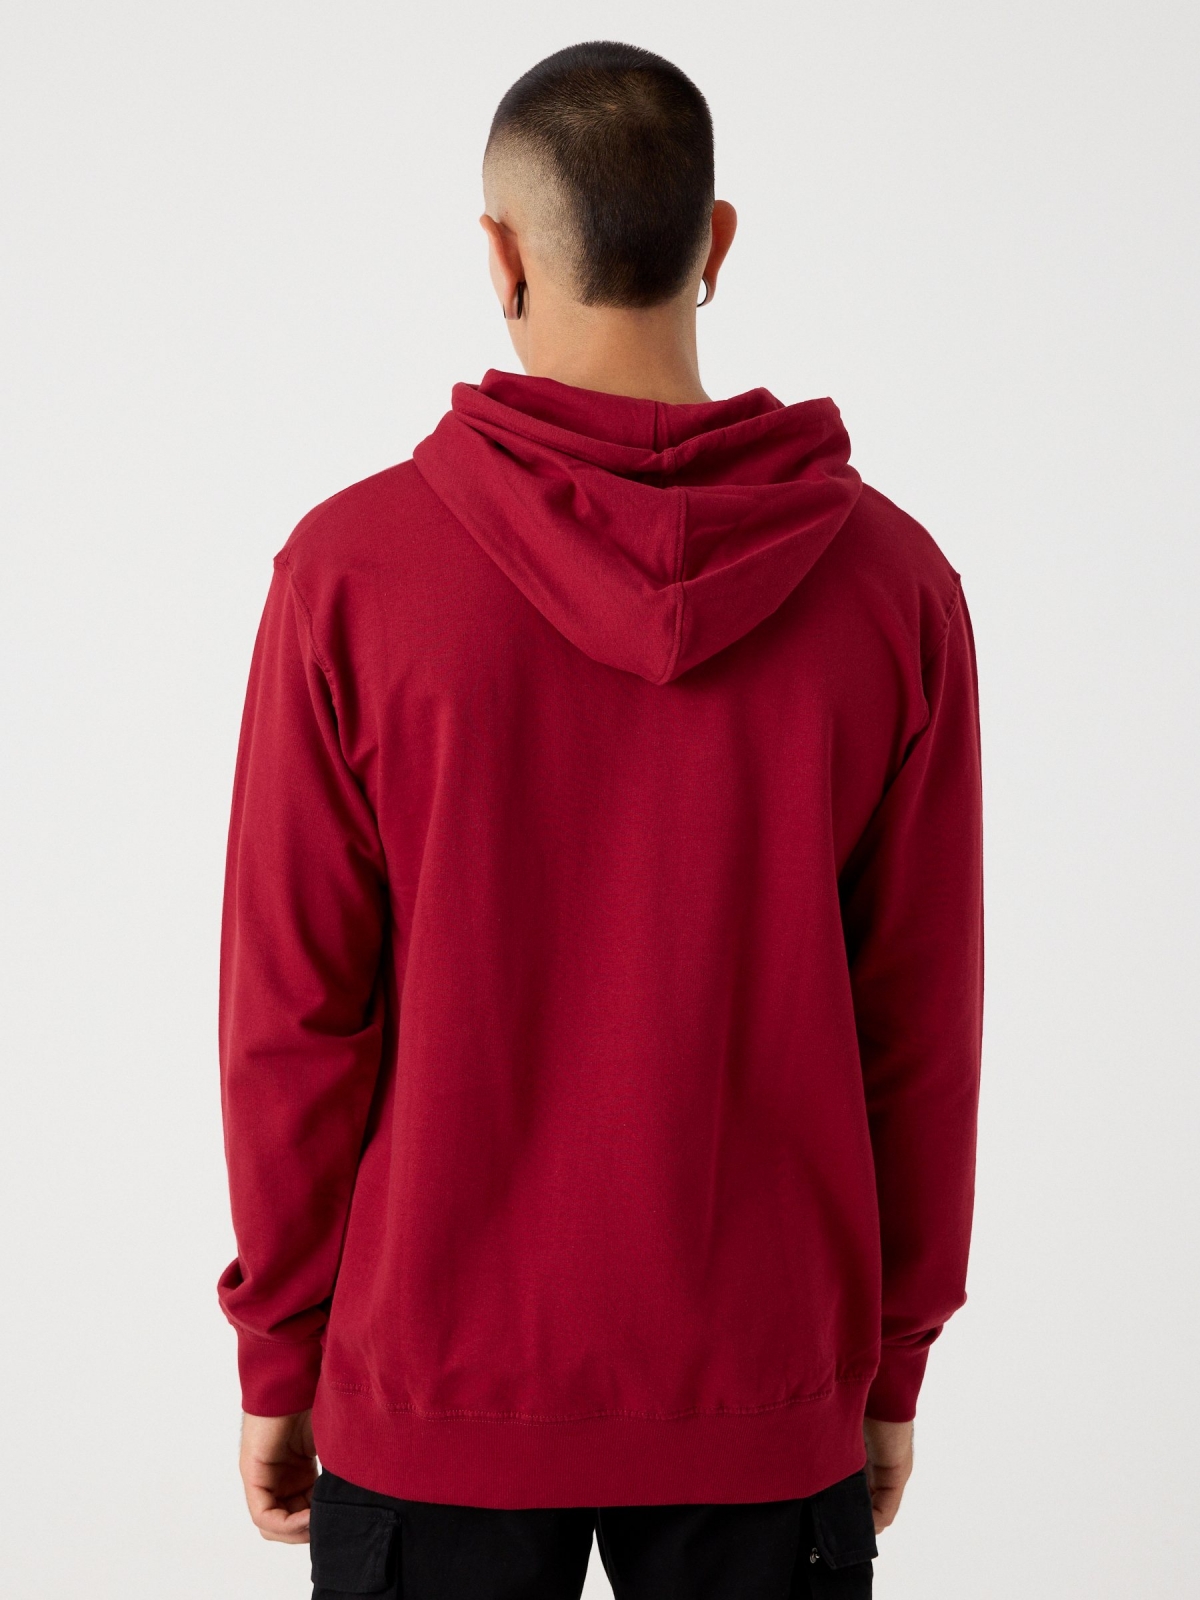 Hooded sweatshirt with logo red middle back view